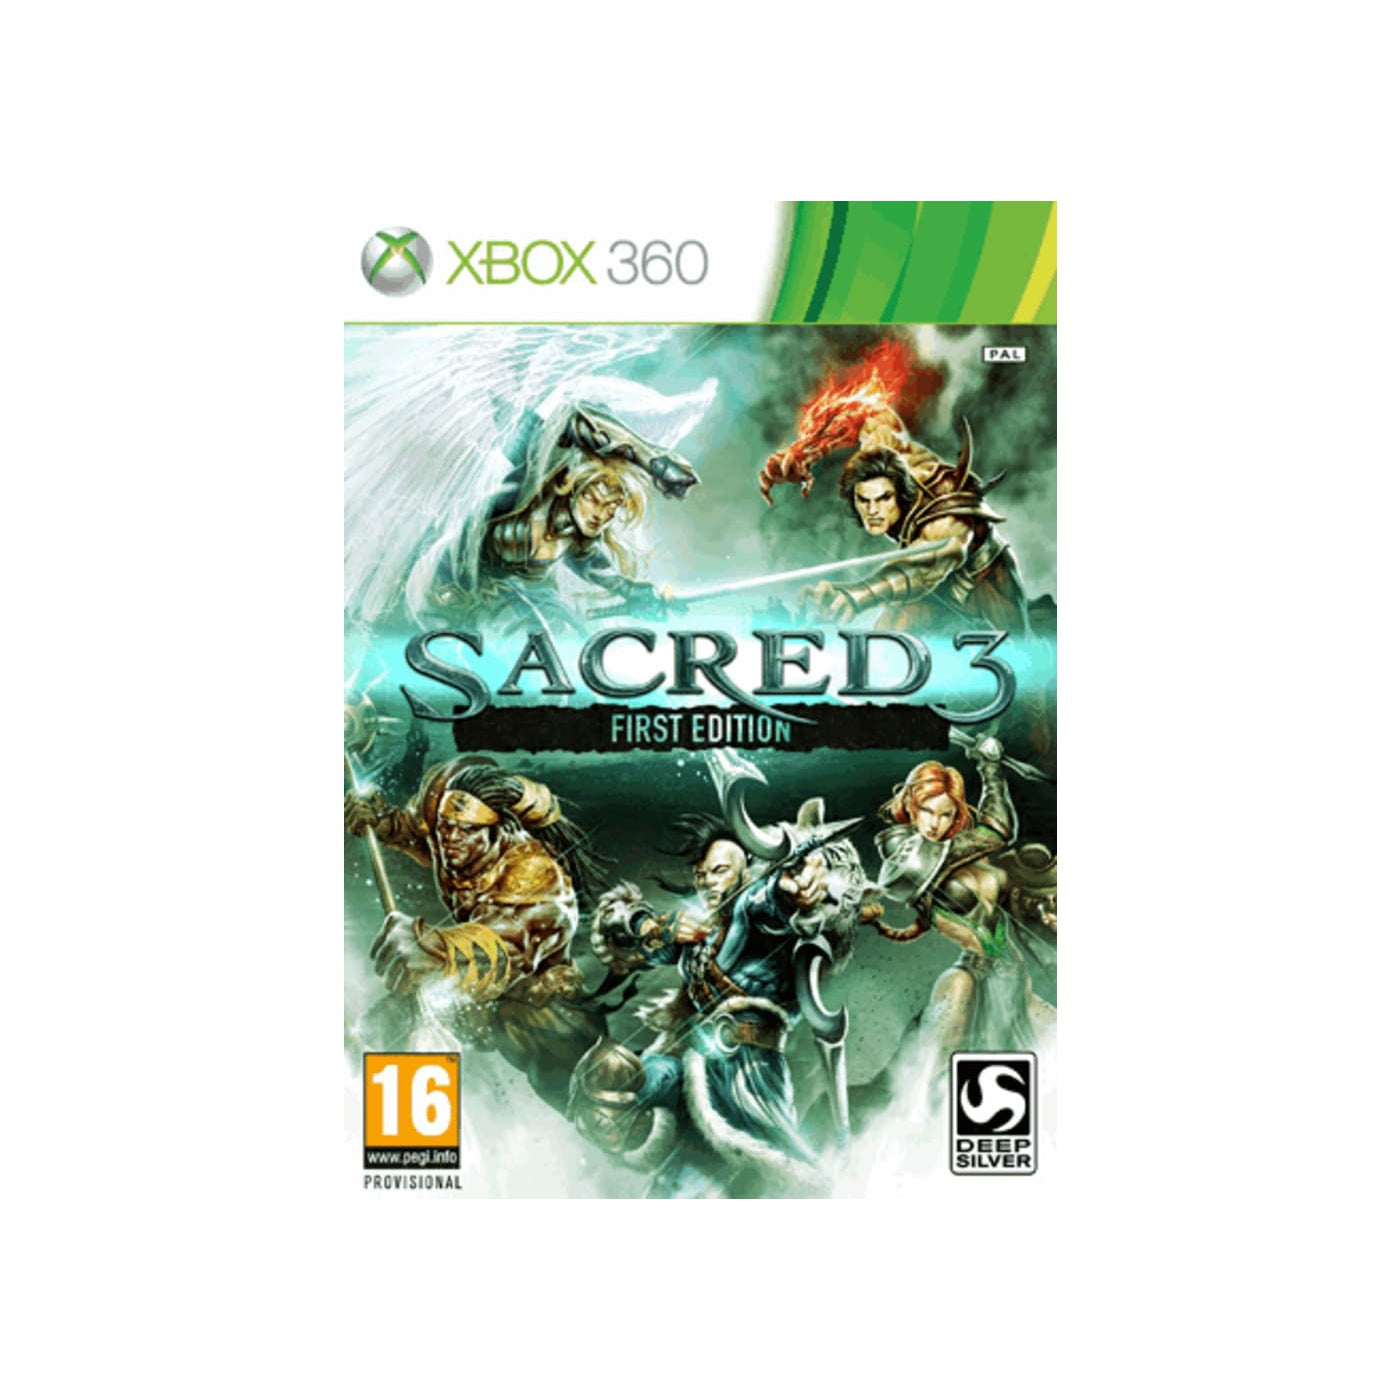 Sacred 3 - First Edition (XBOX 360)